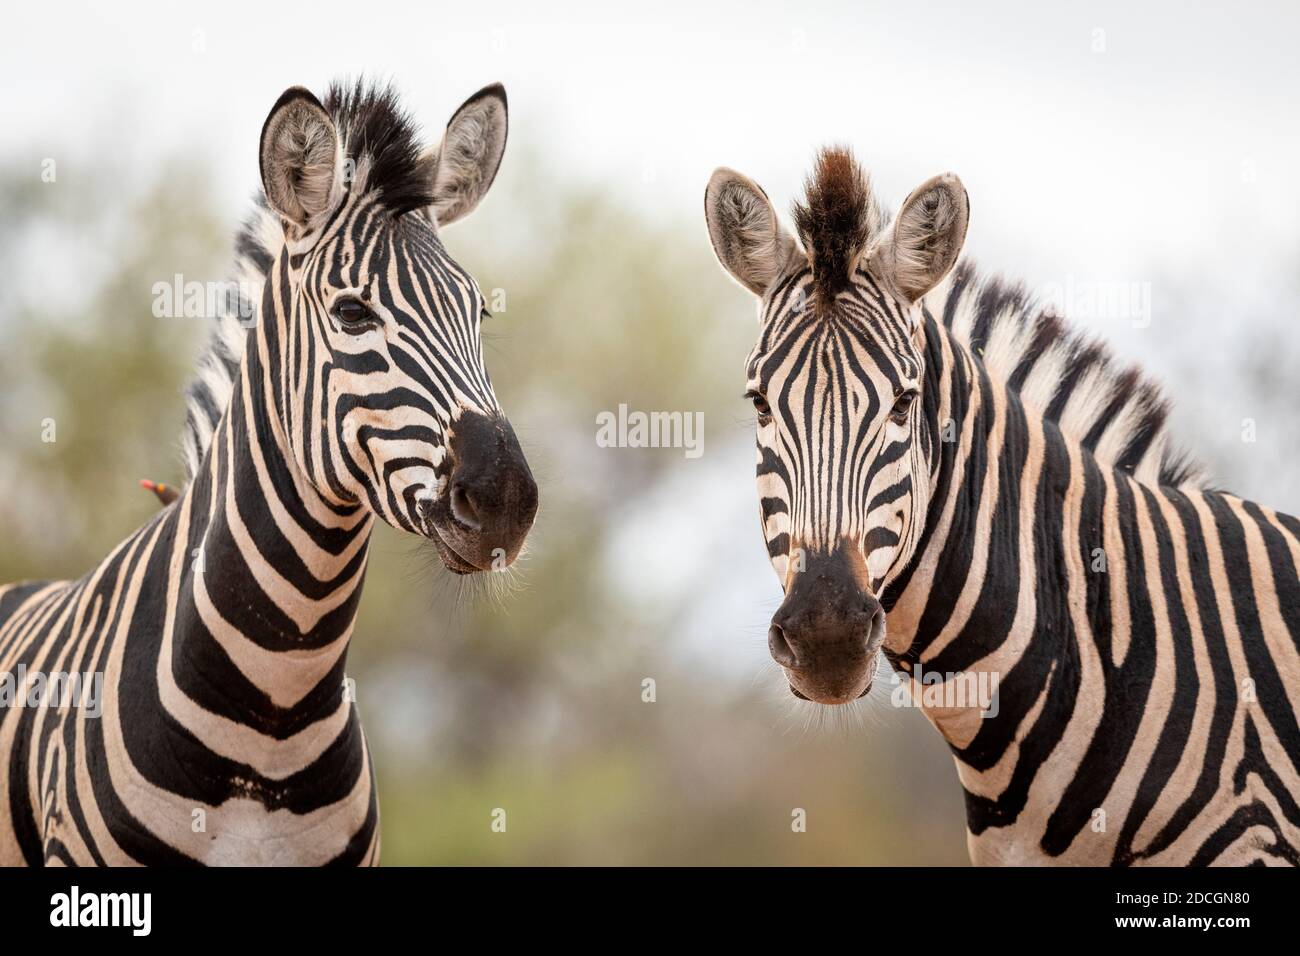 Two zebras standing together in Kruger Park in South Africa Stock Photo